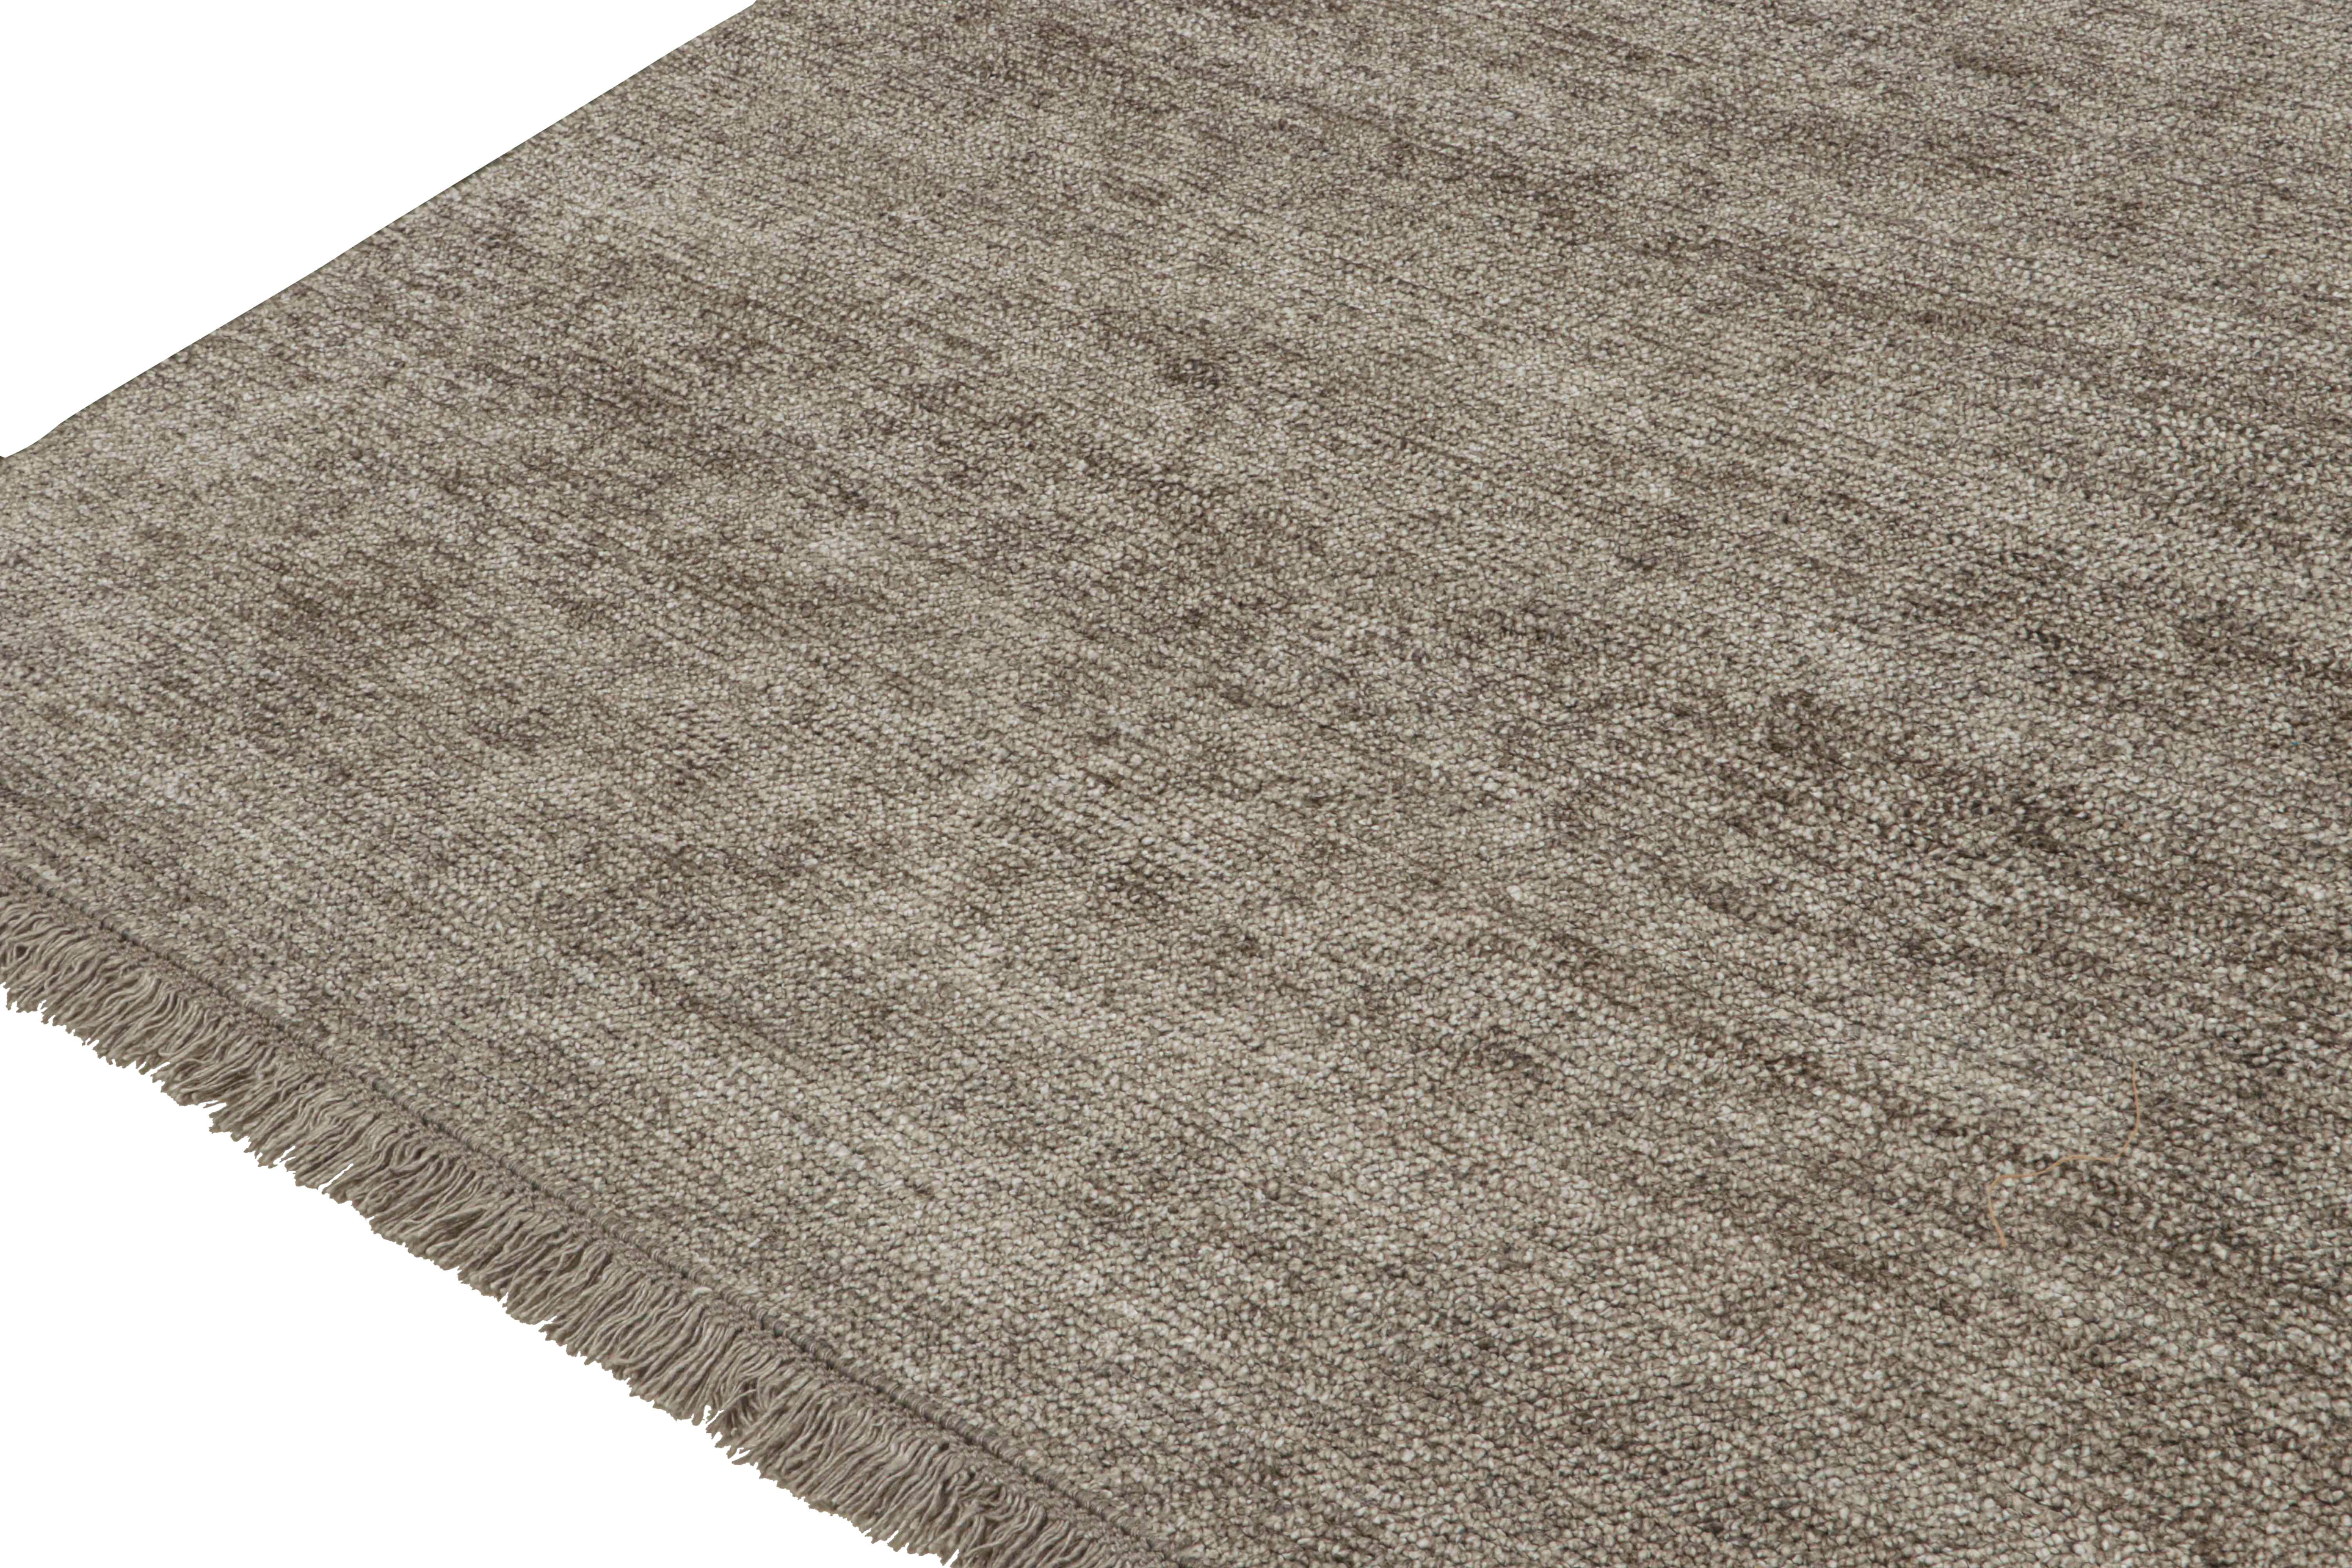 Hand-Knotted Rug & Kilim’s Modern rug in Solid Silver-Gray Tone-on-Tone Striae For Sale